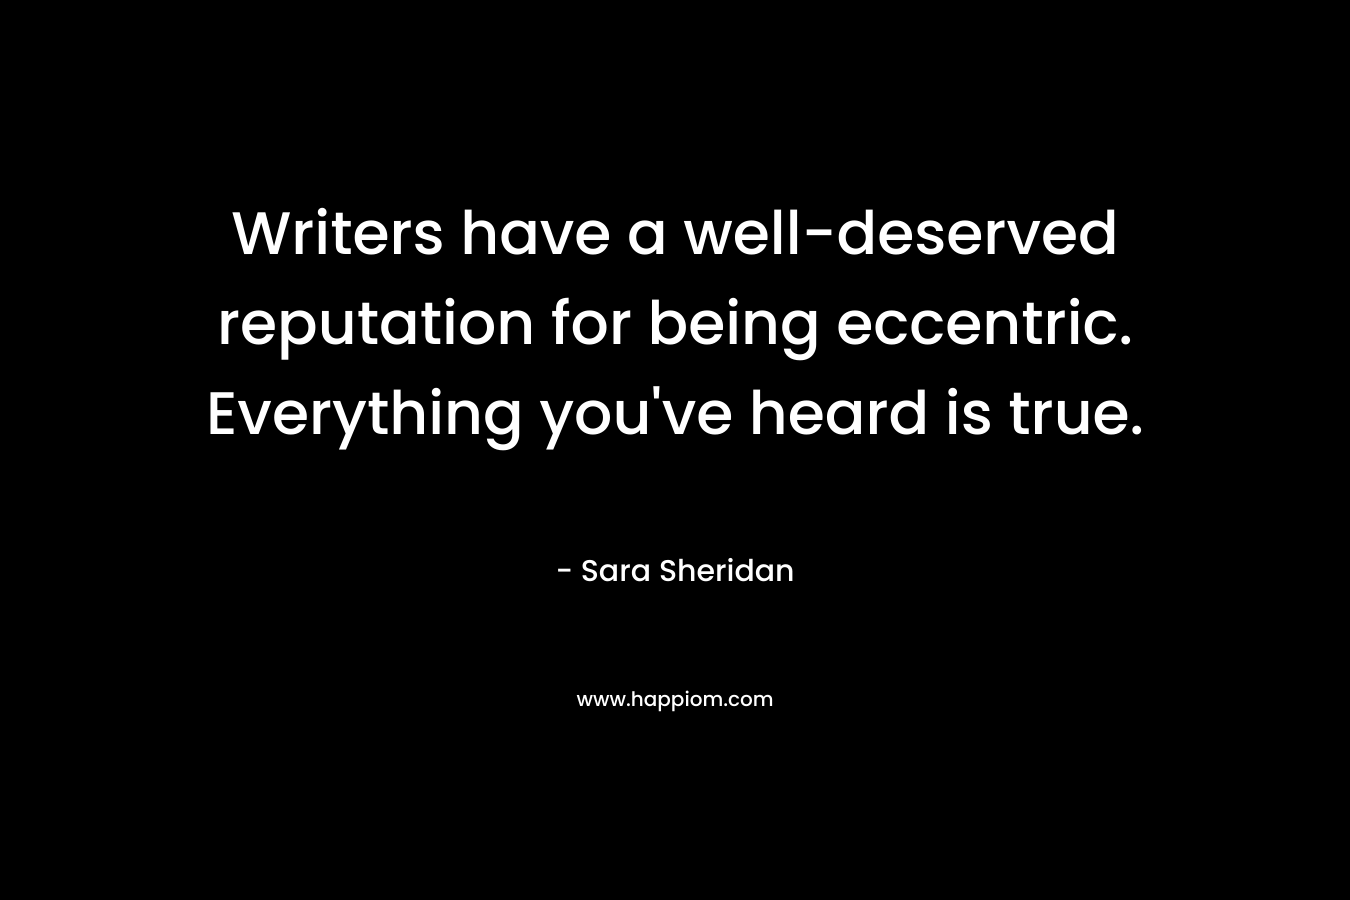 Writers have a well-deserved reputation for being eccentric. Everything you’ve heard is true. – Sara Sheridan